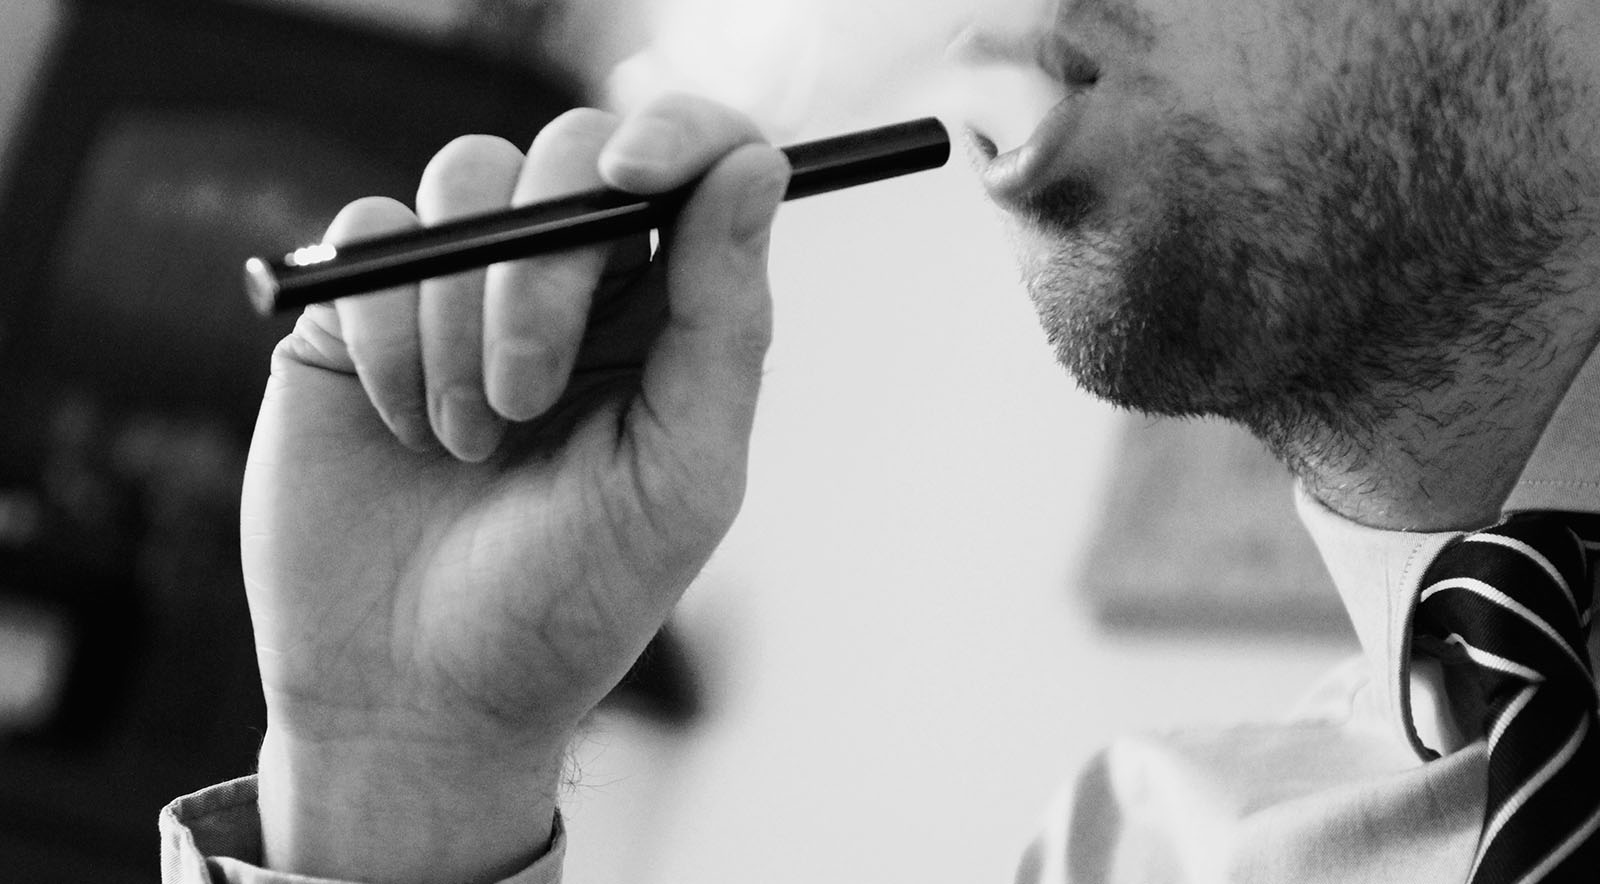 The Do's and Don'ts of Using Weed at Work